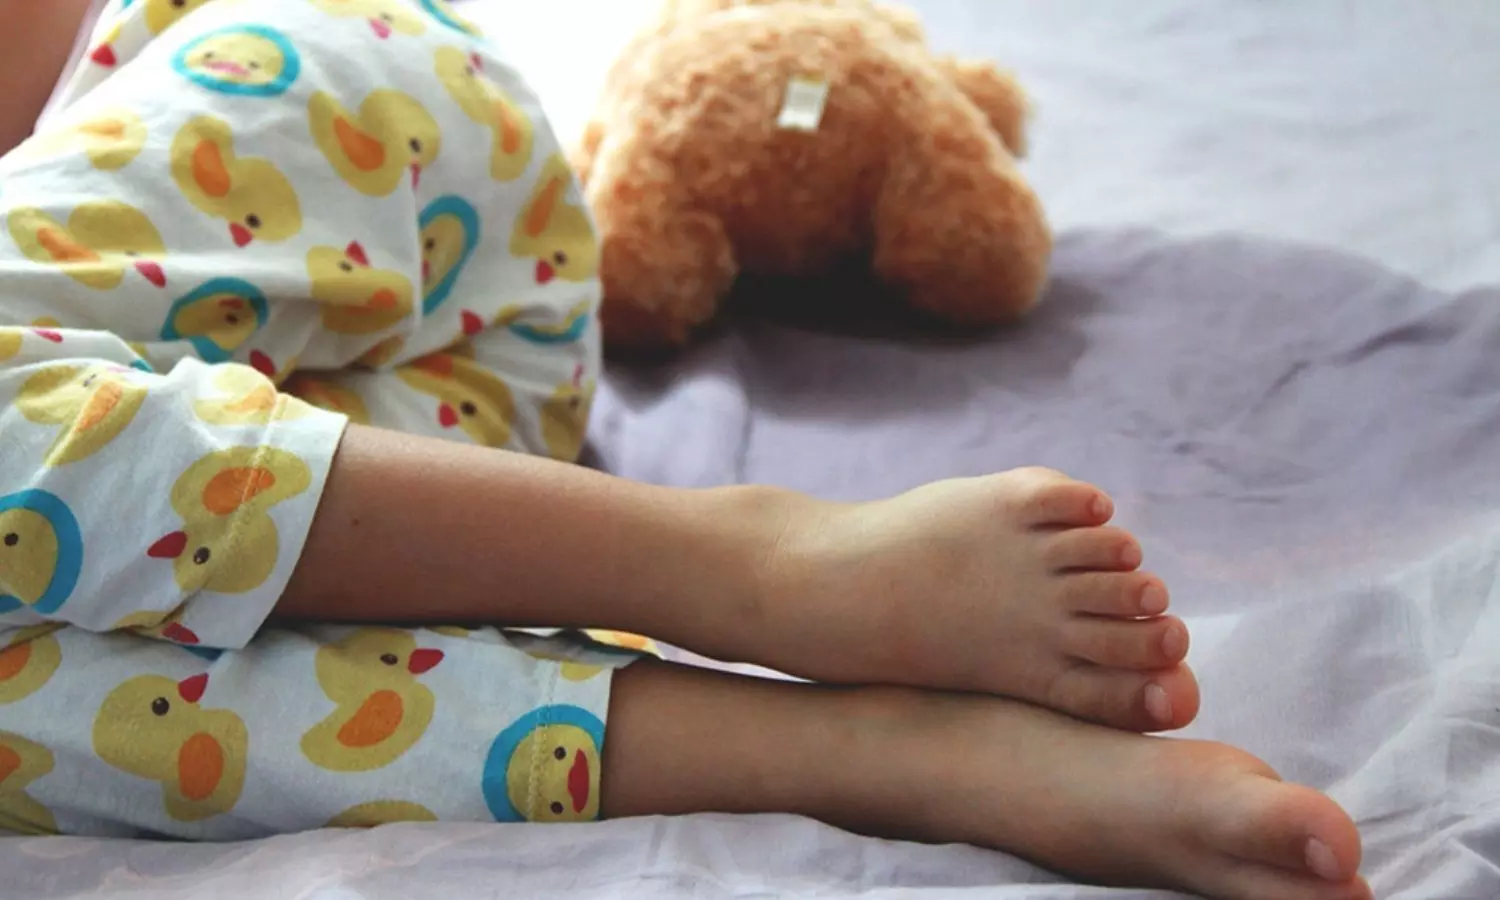 Bell and pad alarm effectively treats enuresis in kids with neurodevelopmental disorders: Study